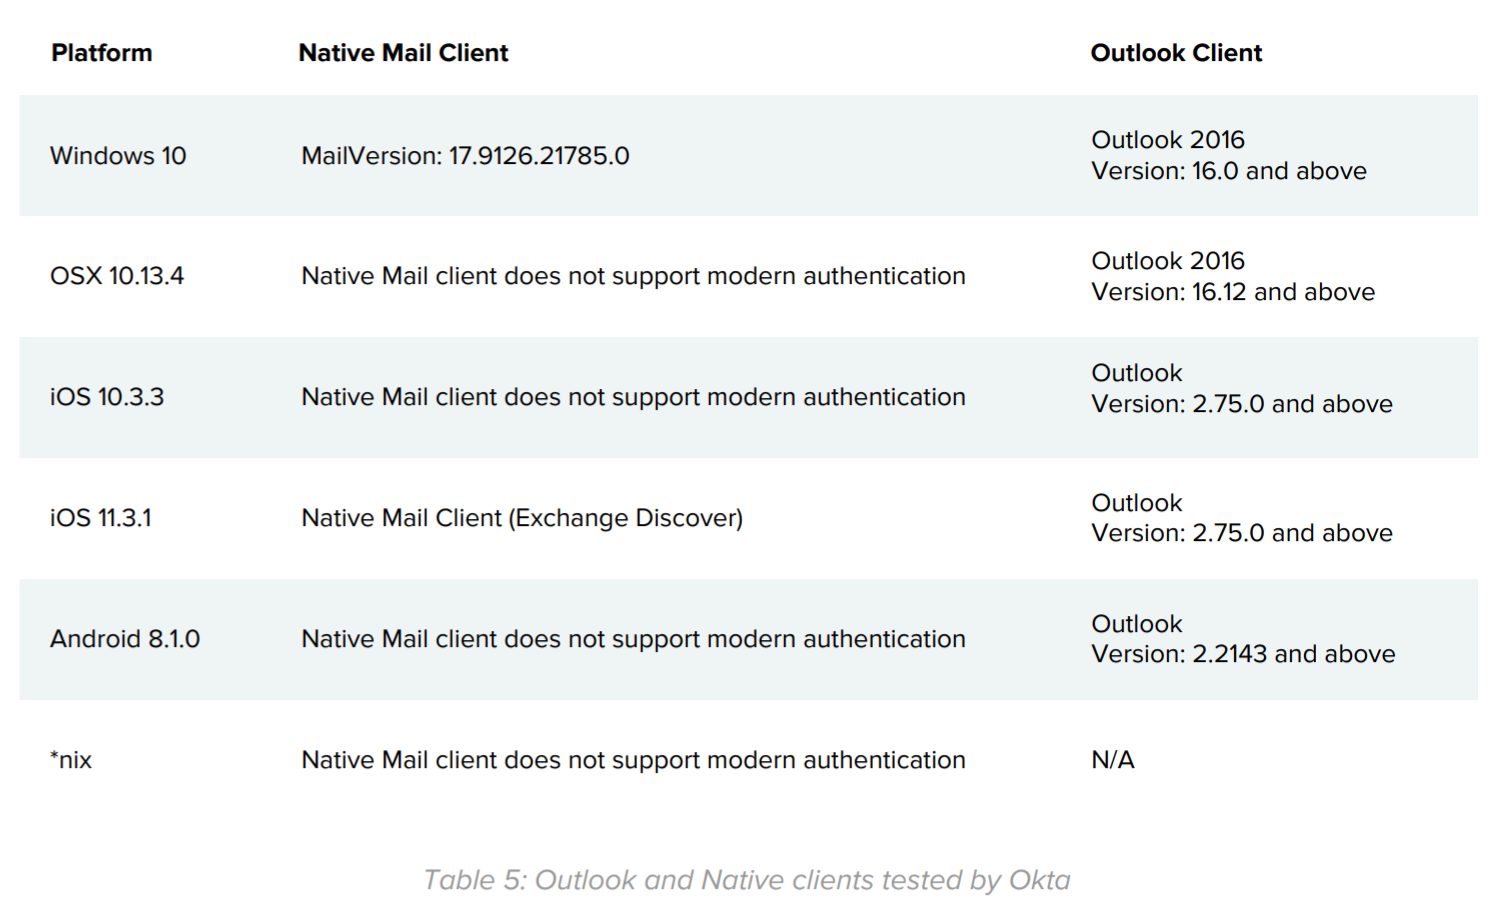 Table 5: Outlook and Native clients tested by Okta.